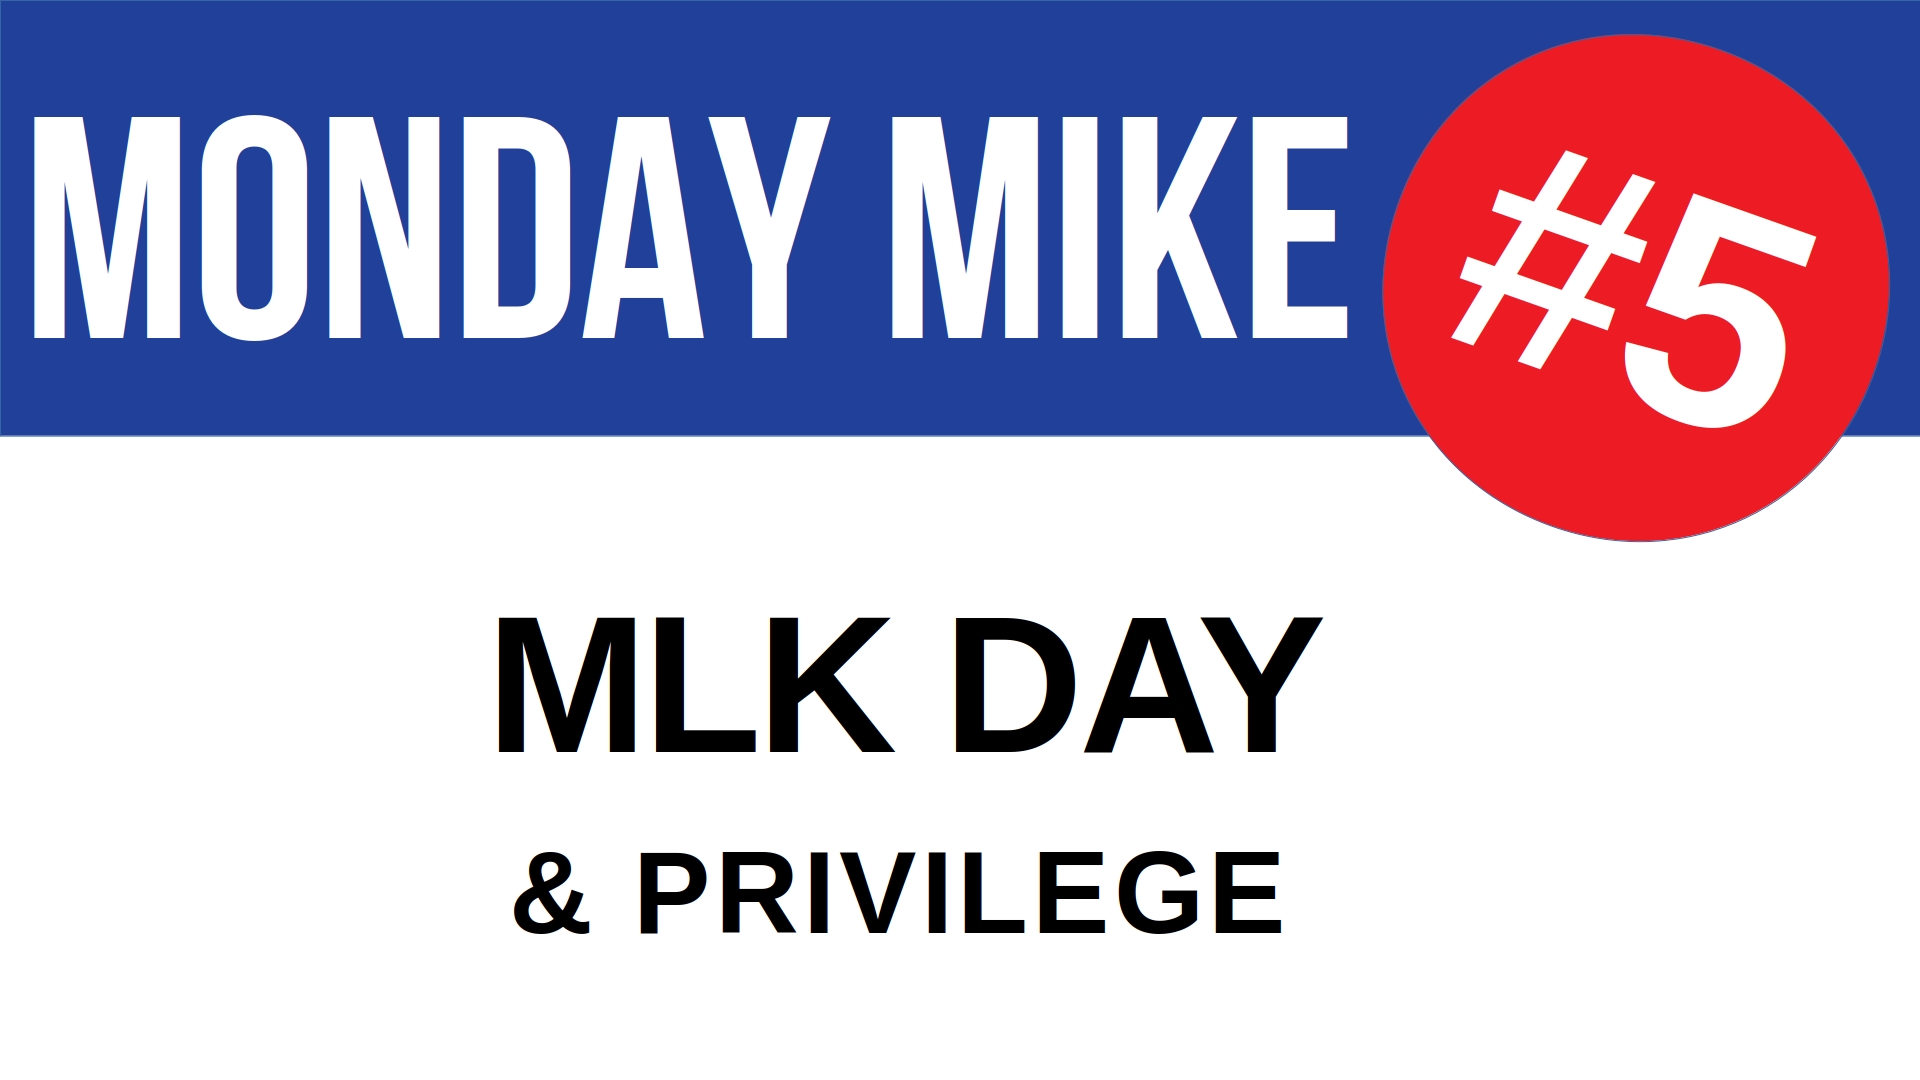 Monday Mike 5: Martin Luther King Day and Privilege